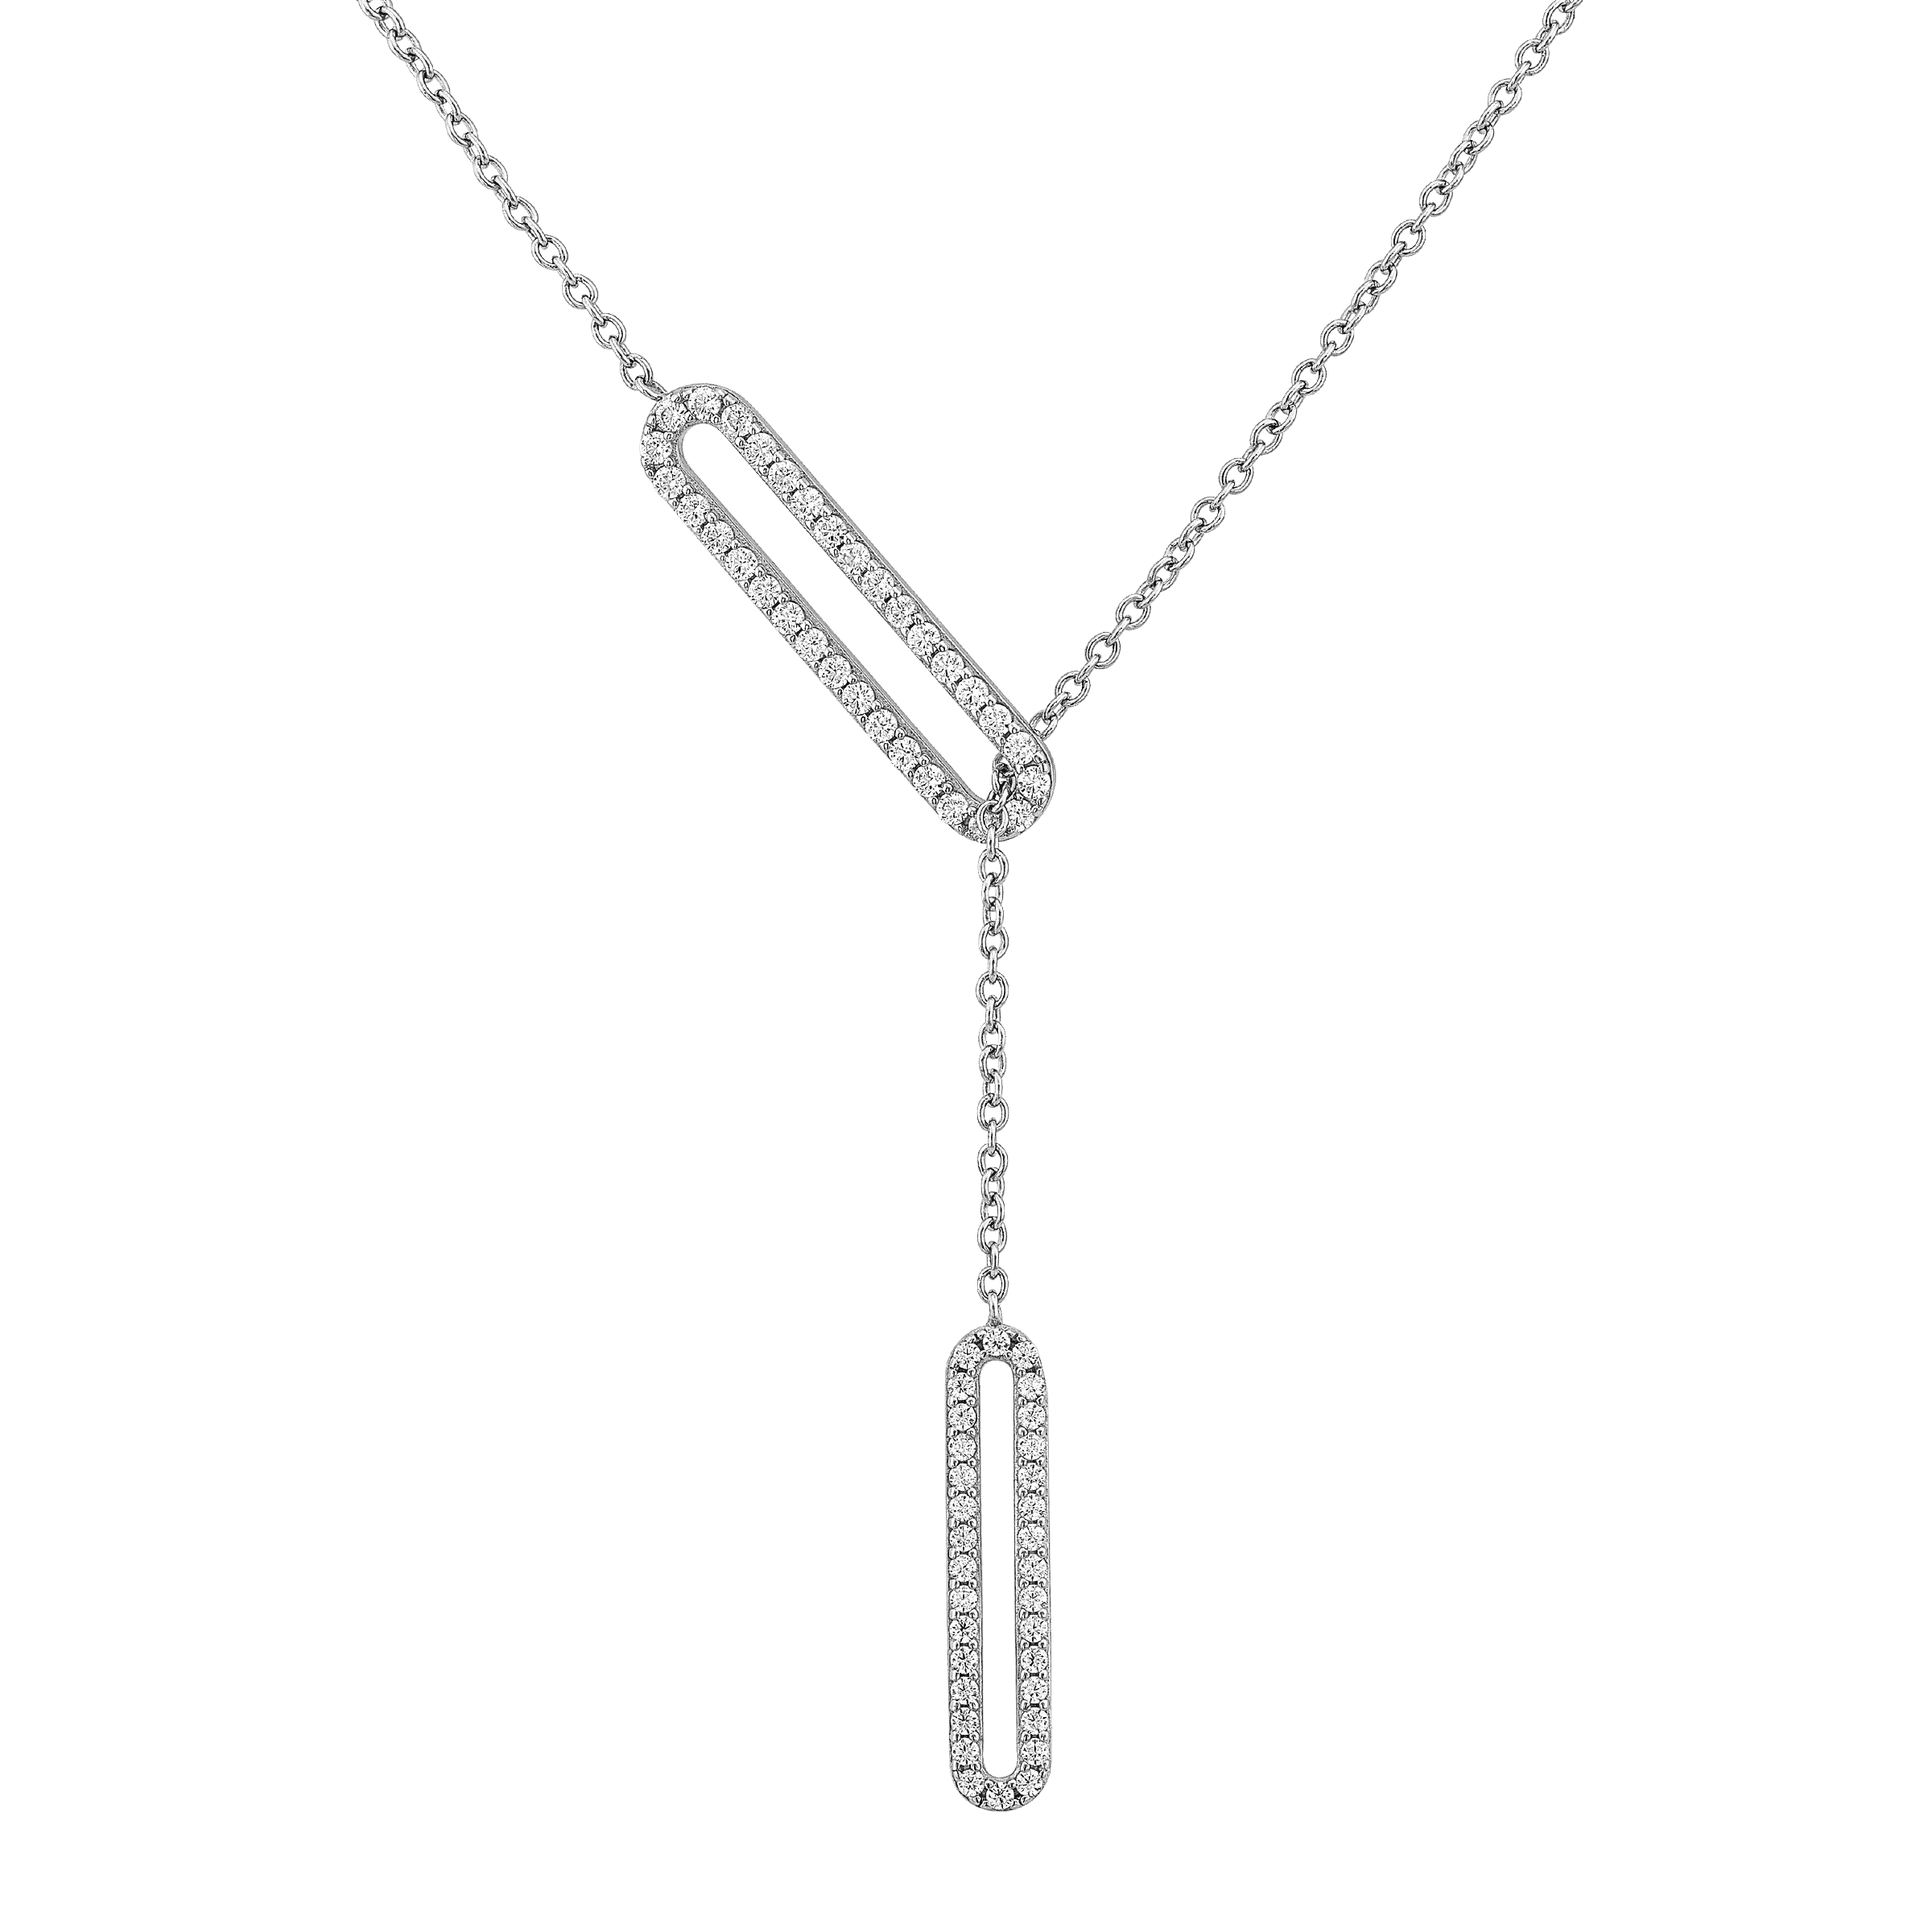 Triple Chain Twist .925 Sterling Silver 20 Necklace from Bali